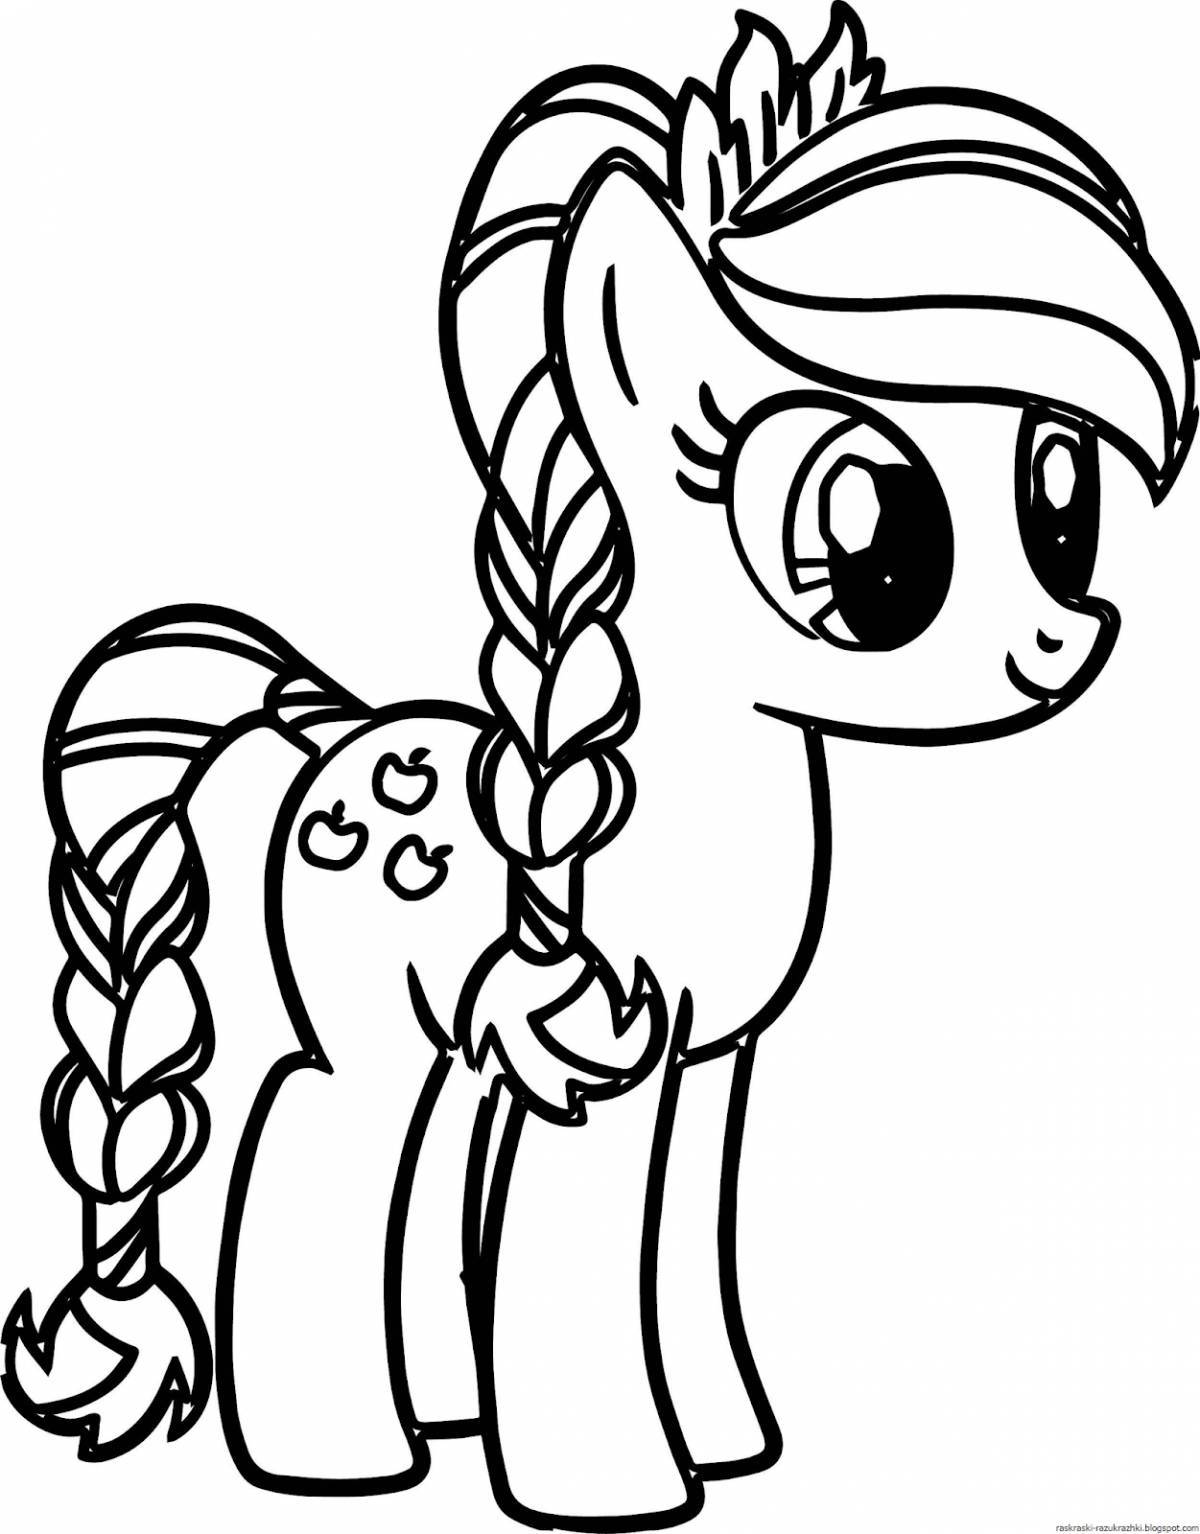 Brilliant pony coloring pages